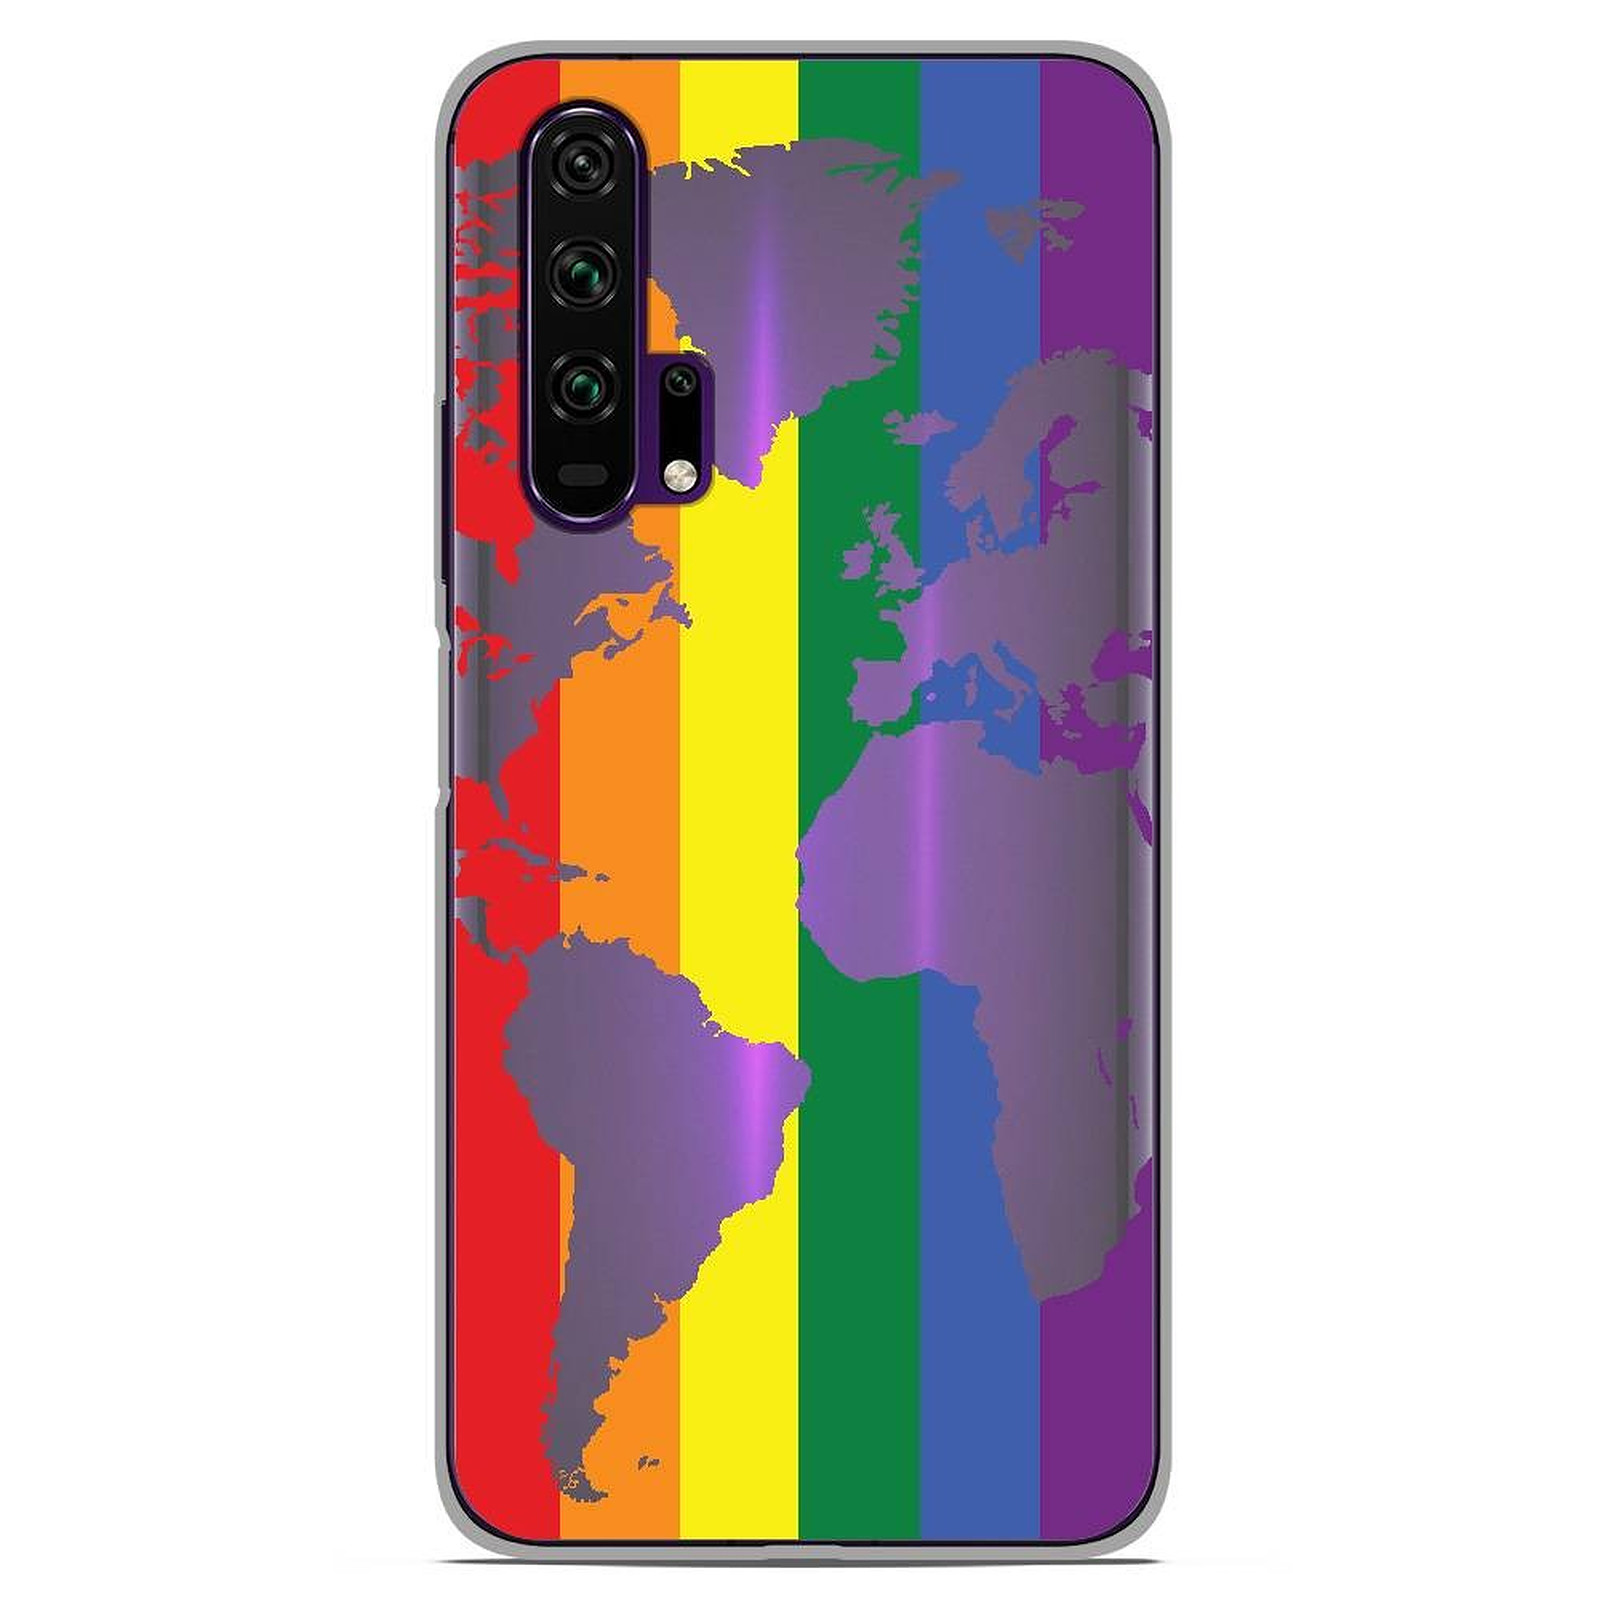 1001 Coques Coque silicone gel Huawei Honor 20 Pro motif Map LGBT - Coque telephone 1001Coques